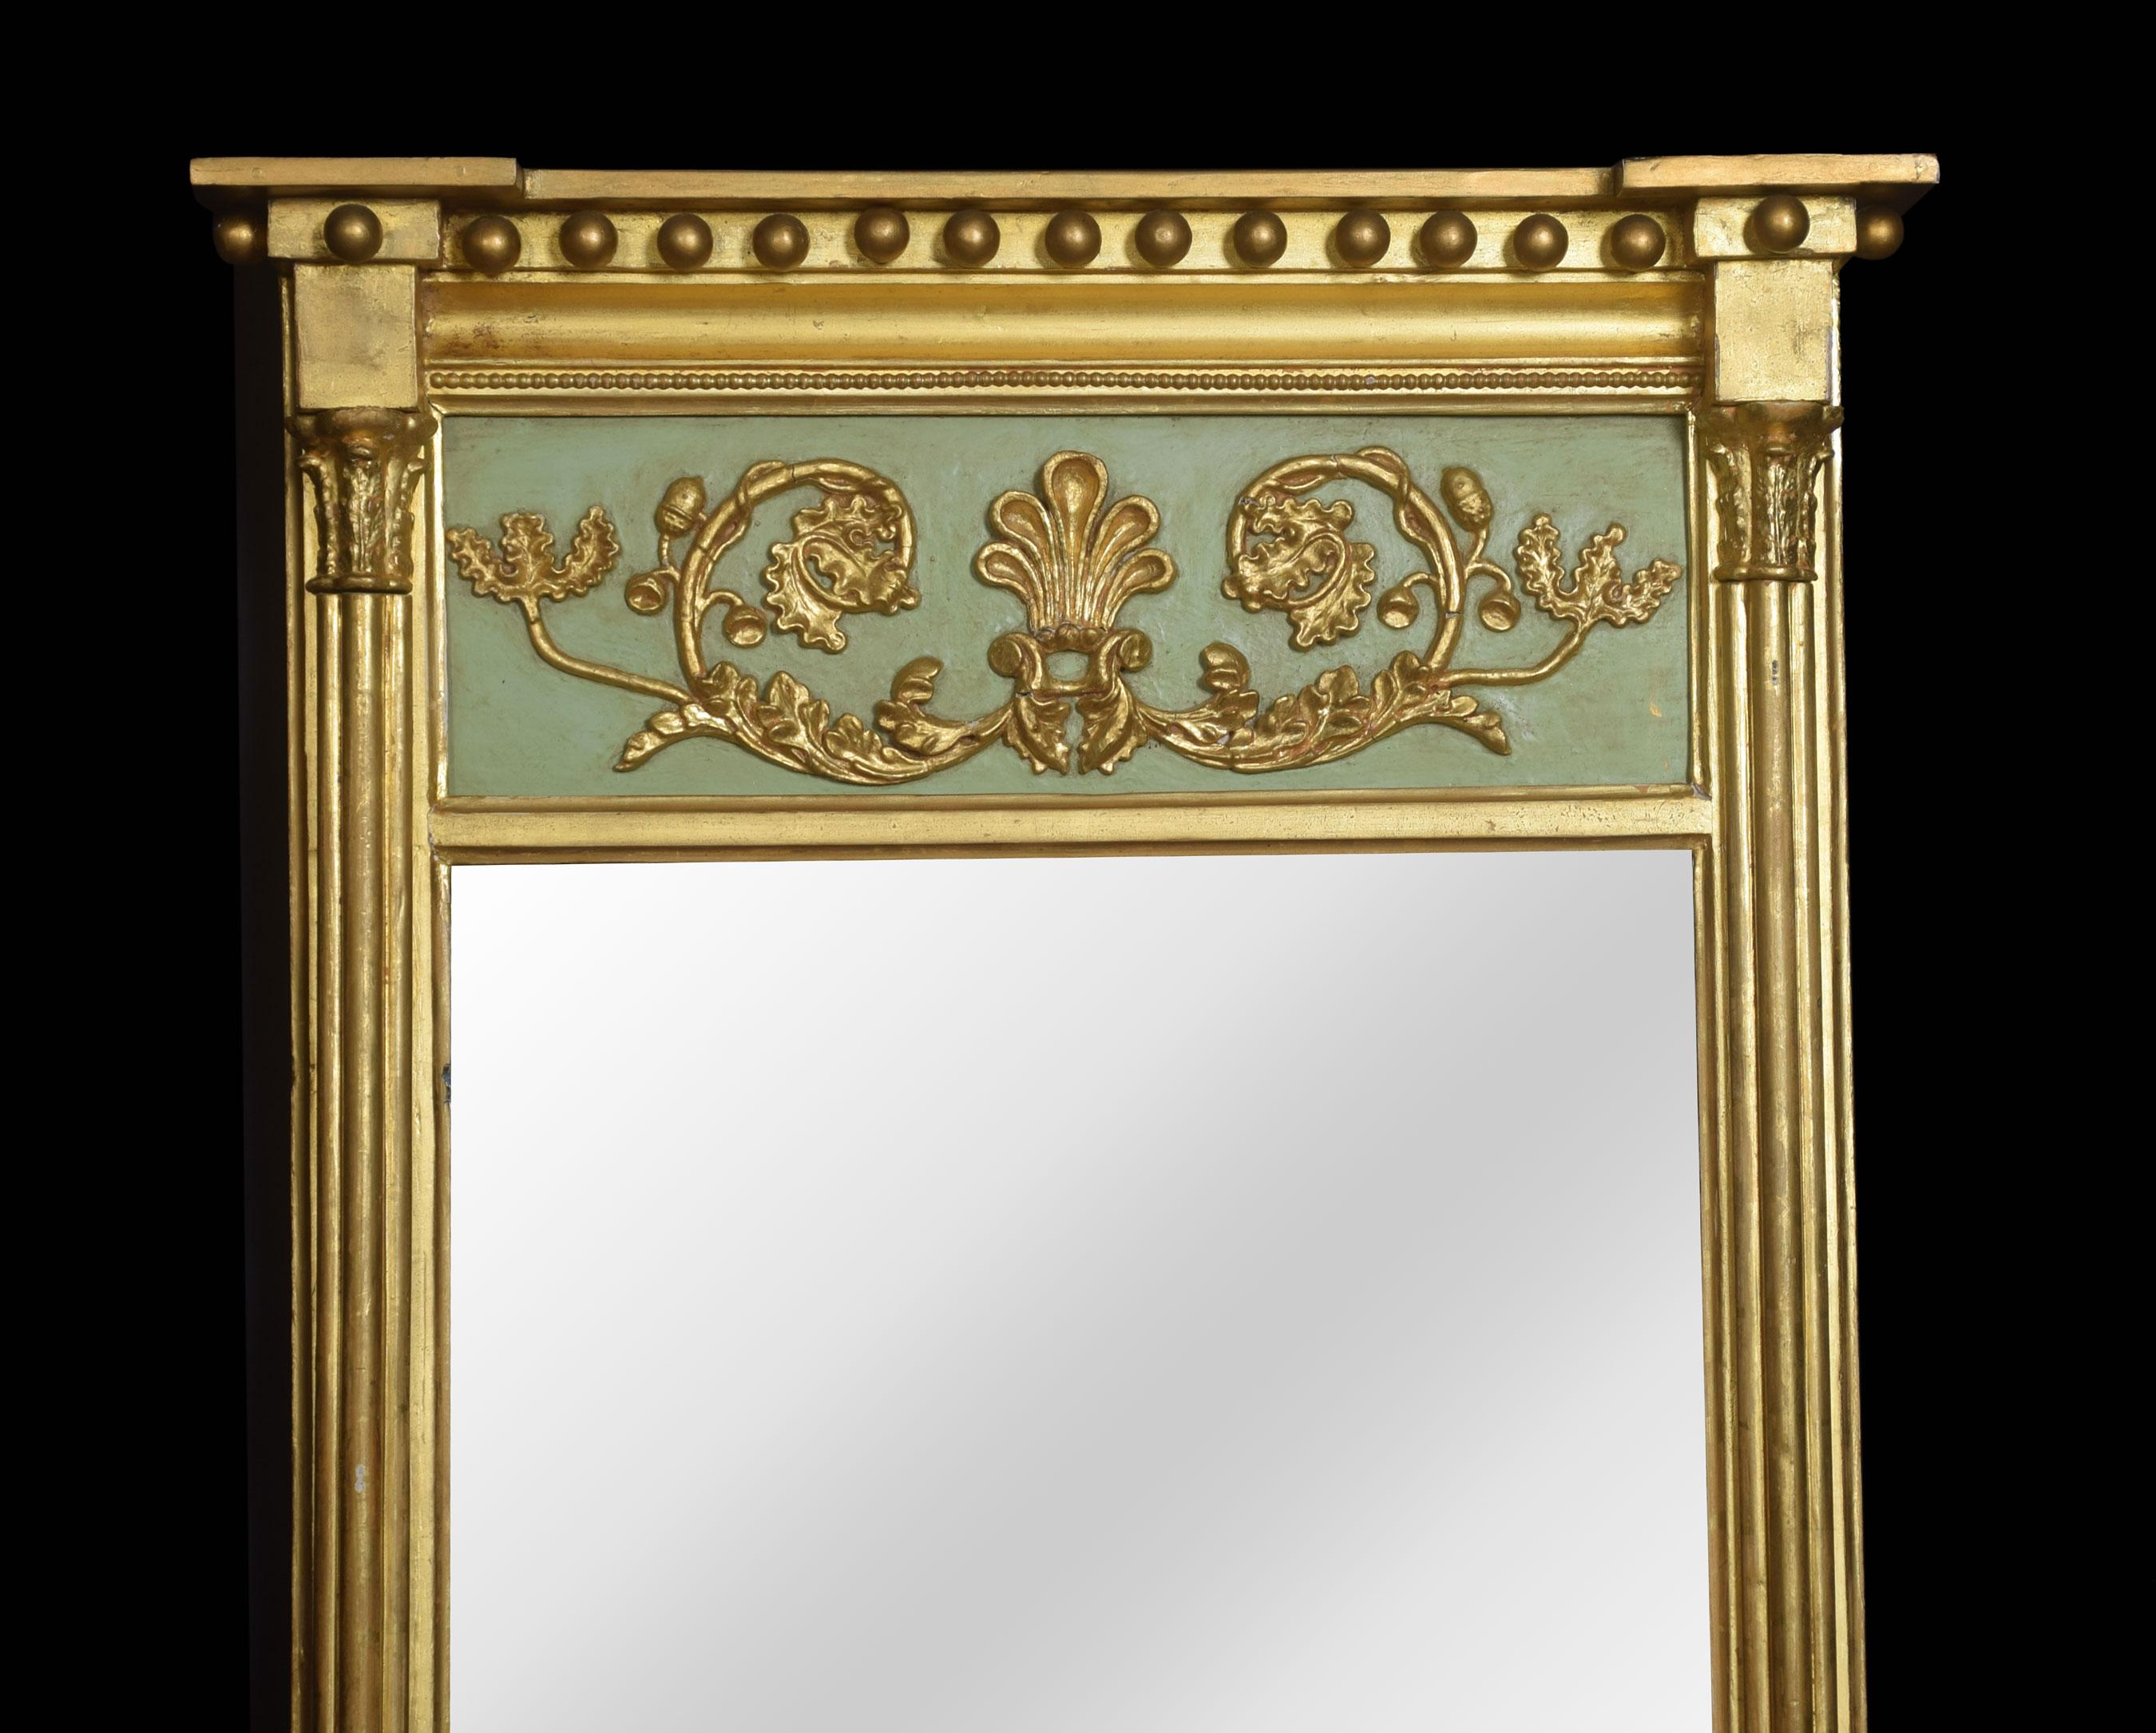 Regency style pier mirror, of rectangular form, the moulded top above moulded ball decoration to the painted panel applied with gilt relief decoration, above the original mirrored plate, within a gilt moulded border.
Dimensions:
Height 42